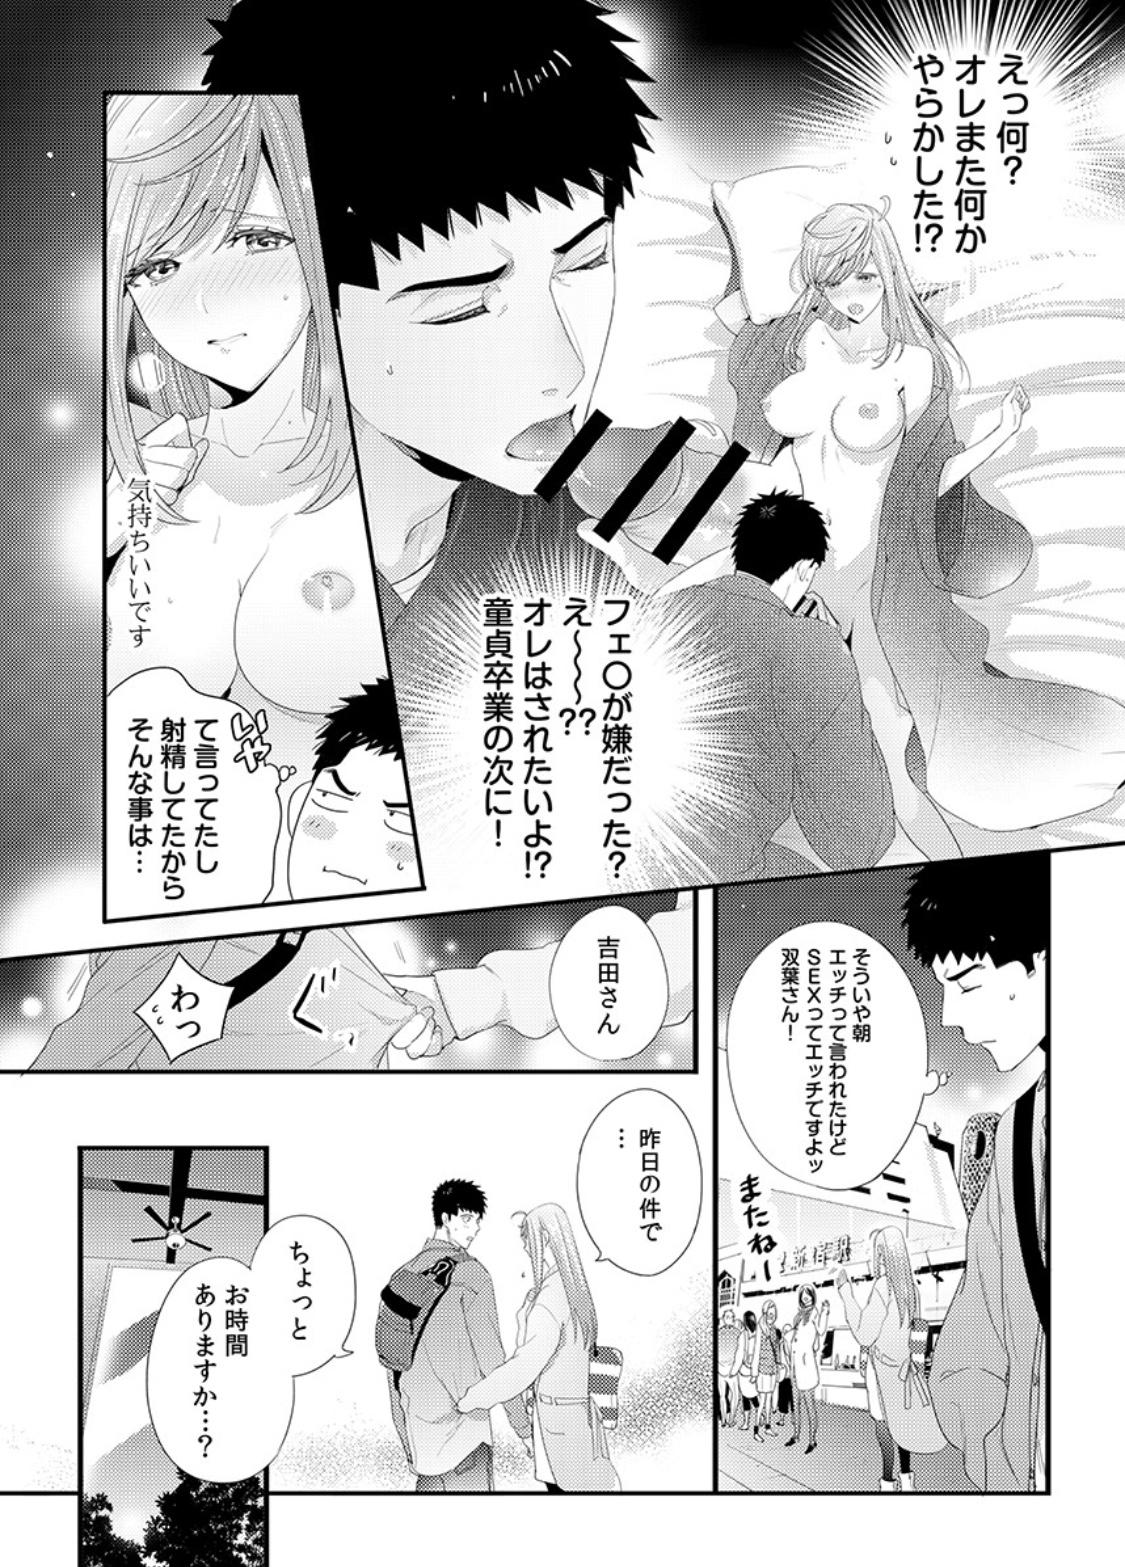 Please Let Me Hold You Futaba-San! Ch. 1-4 33